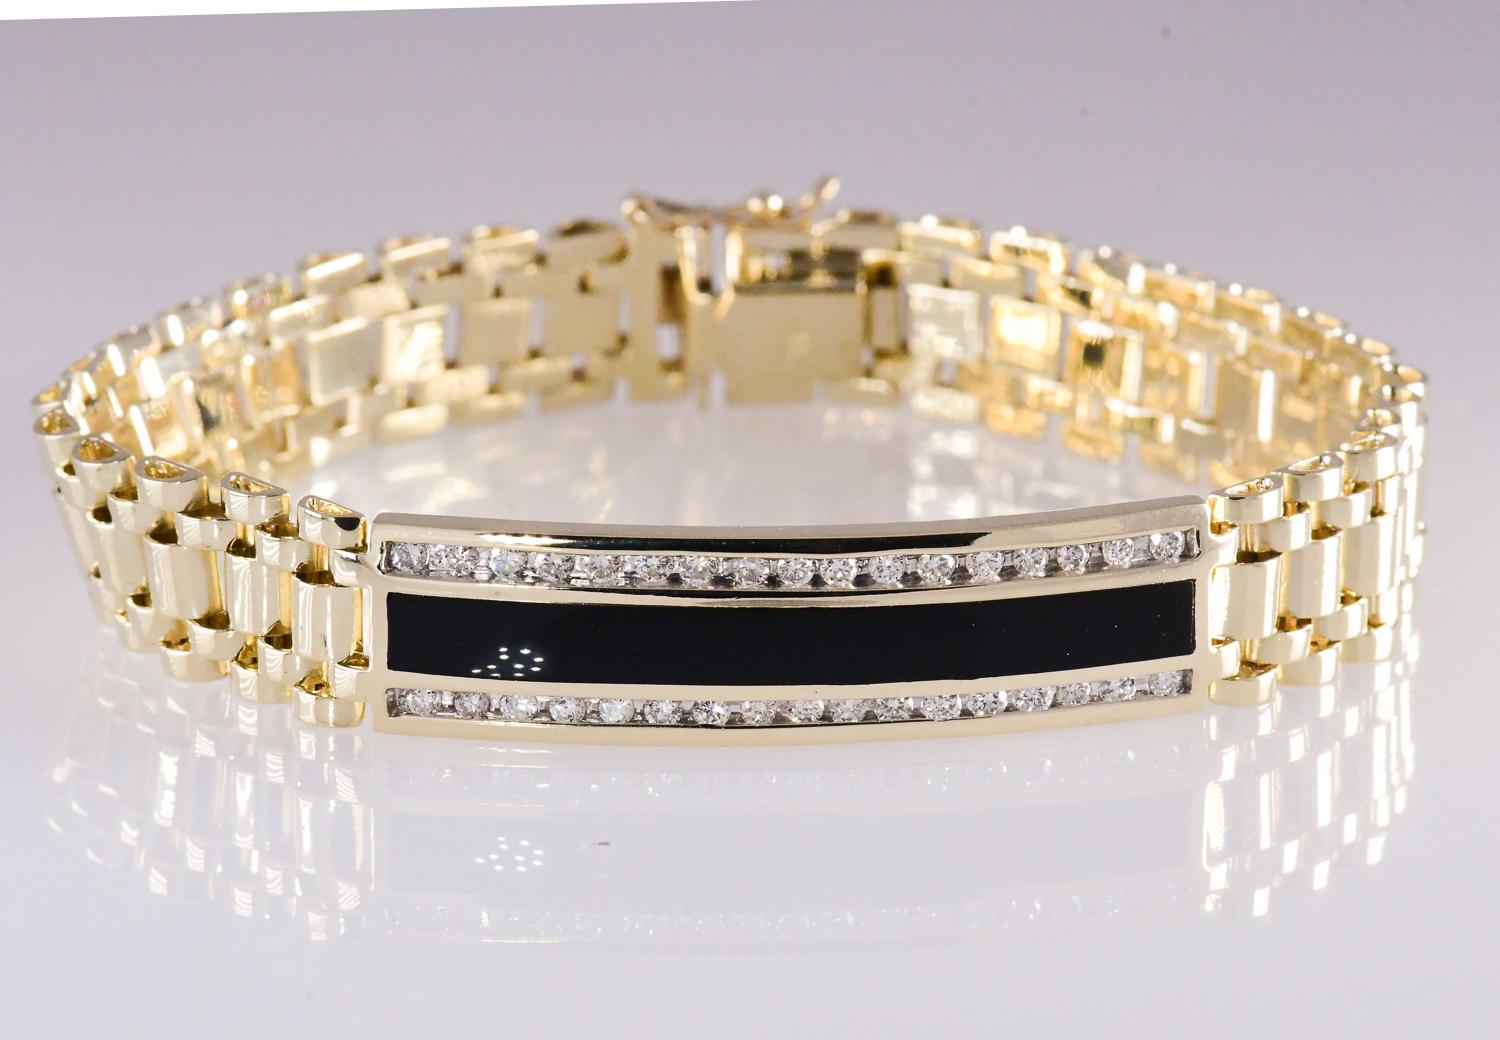 Large elegant diamond and onyx 14 karat yellow gold bracelet measuring 8.25 inches long. The center inlay onyx is flanked by two rows of round brilliant cut diamonds totaling 1.0 carat. The quality is SI2-I2; I-L  The weight of the bracelet is 35.6